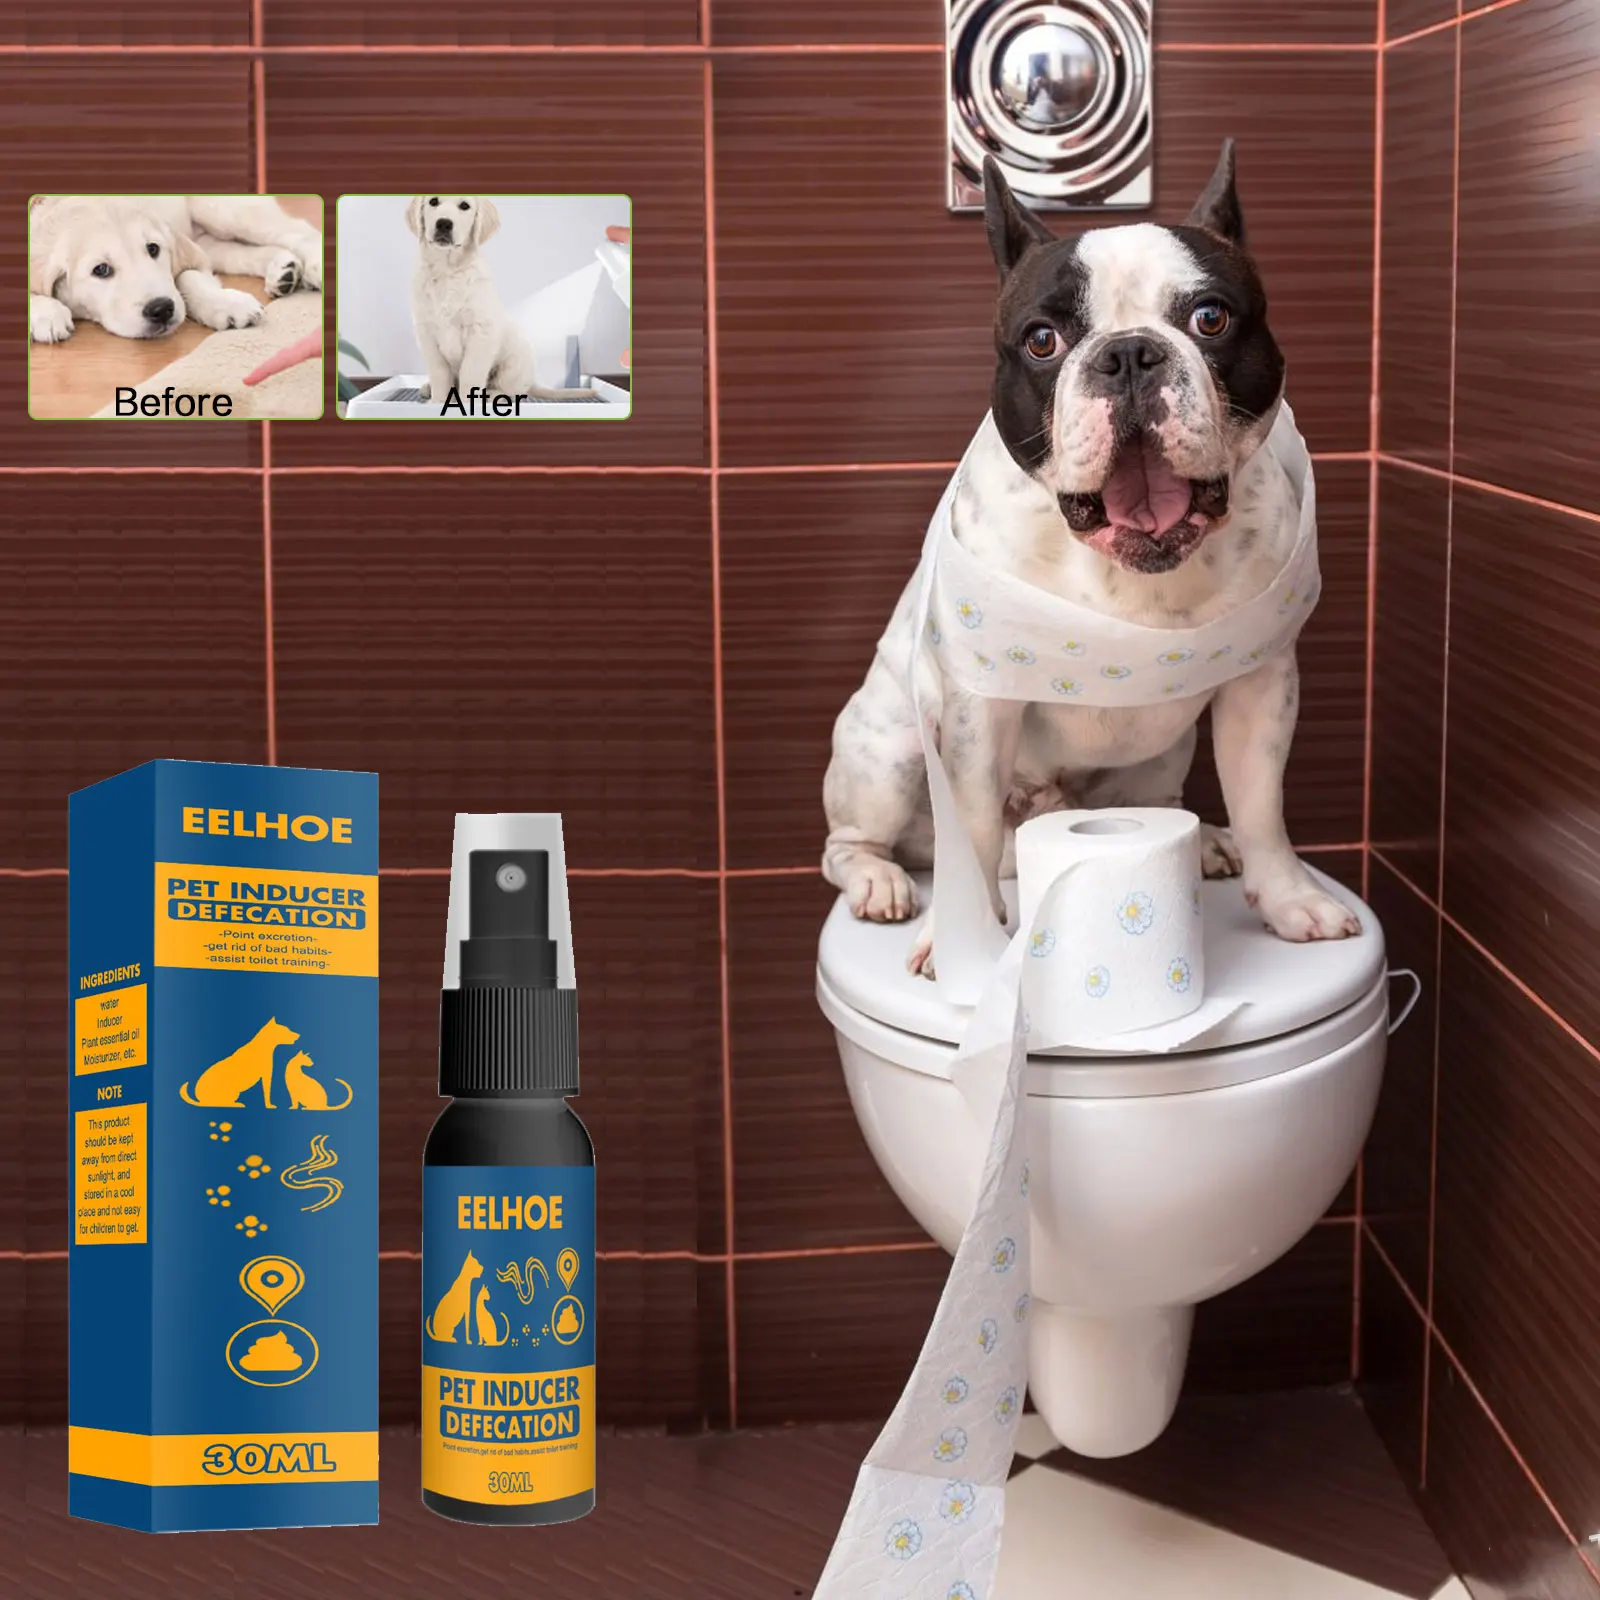 

Pet Defecation Spray Pee Positioning Cat Dog Potty Inducer Toilet Trainer Indoor Puppy Pee Location Pet Toilet Training Spray